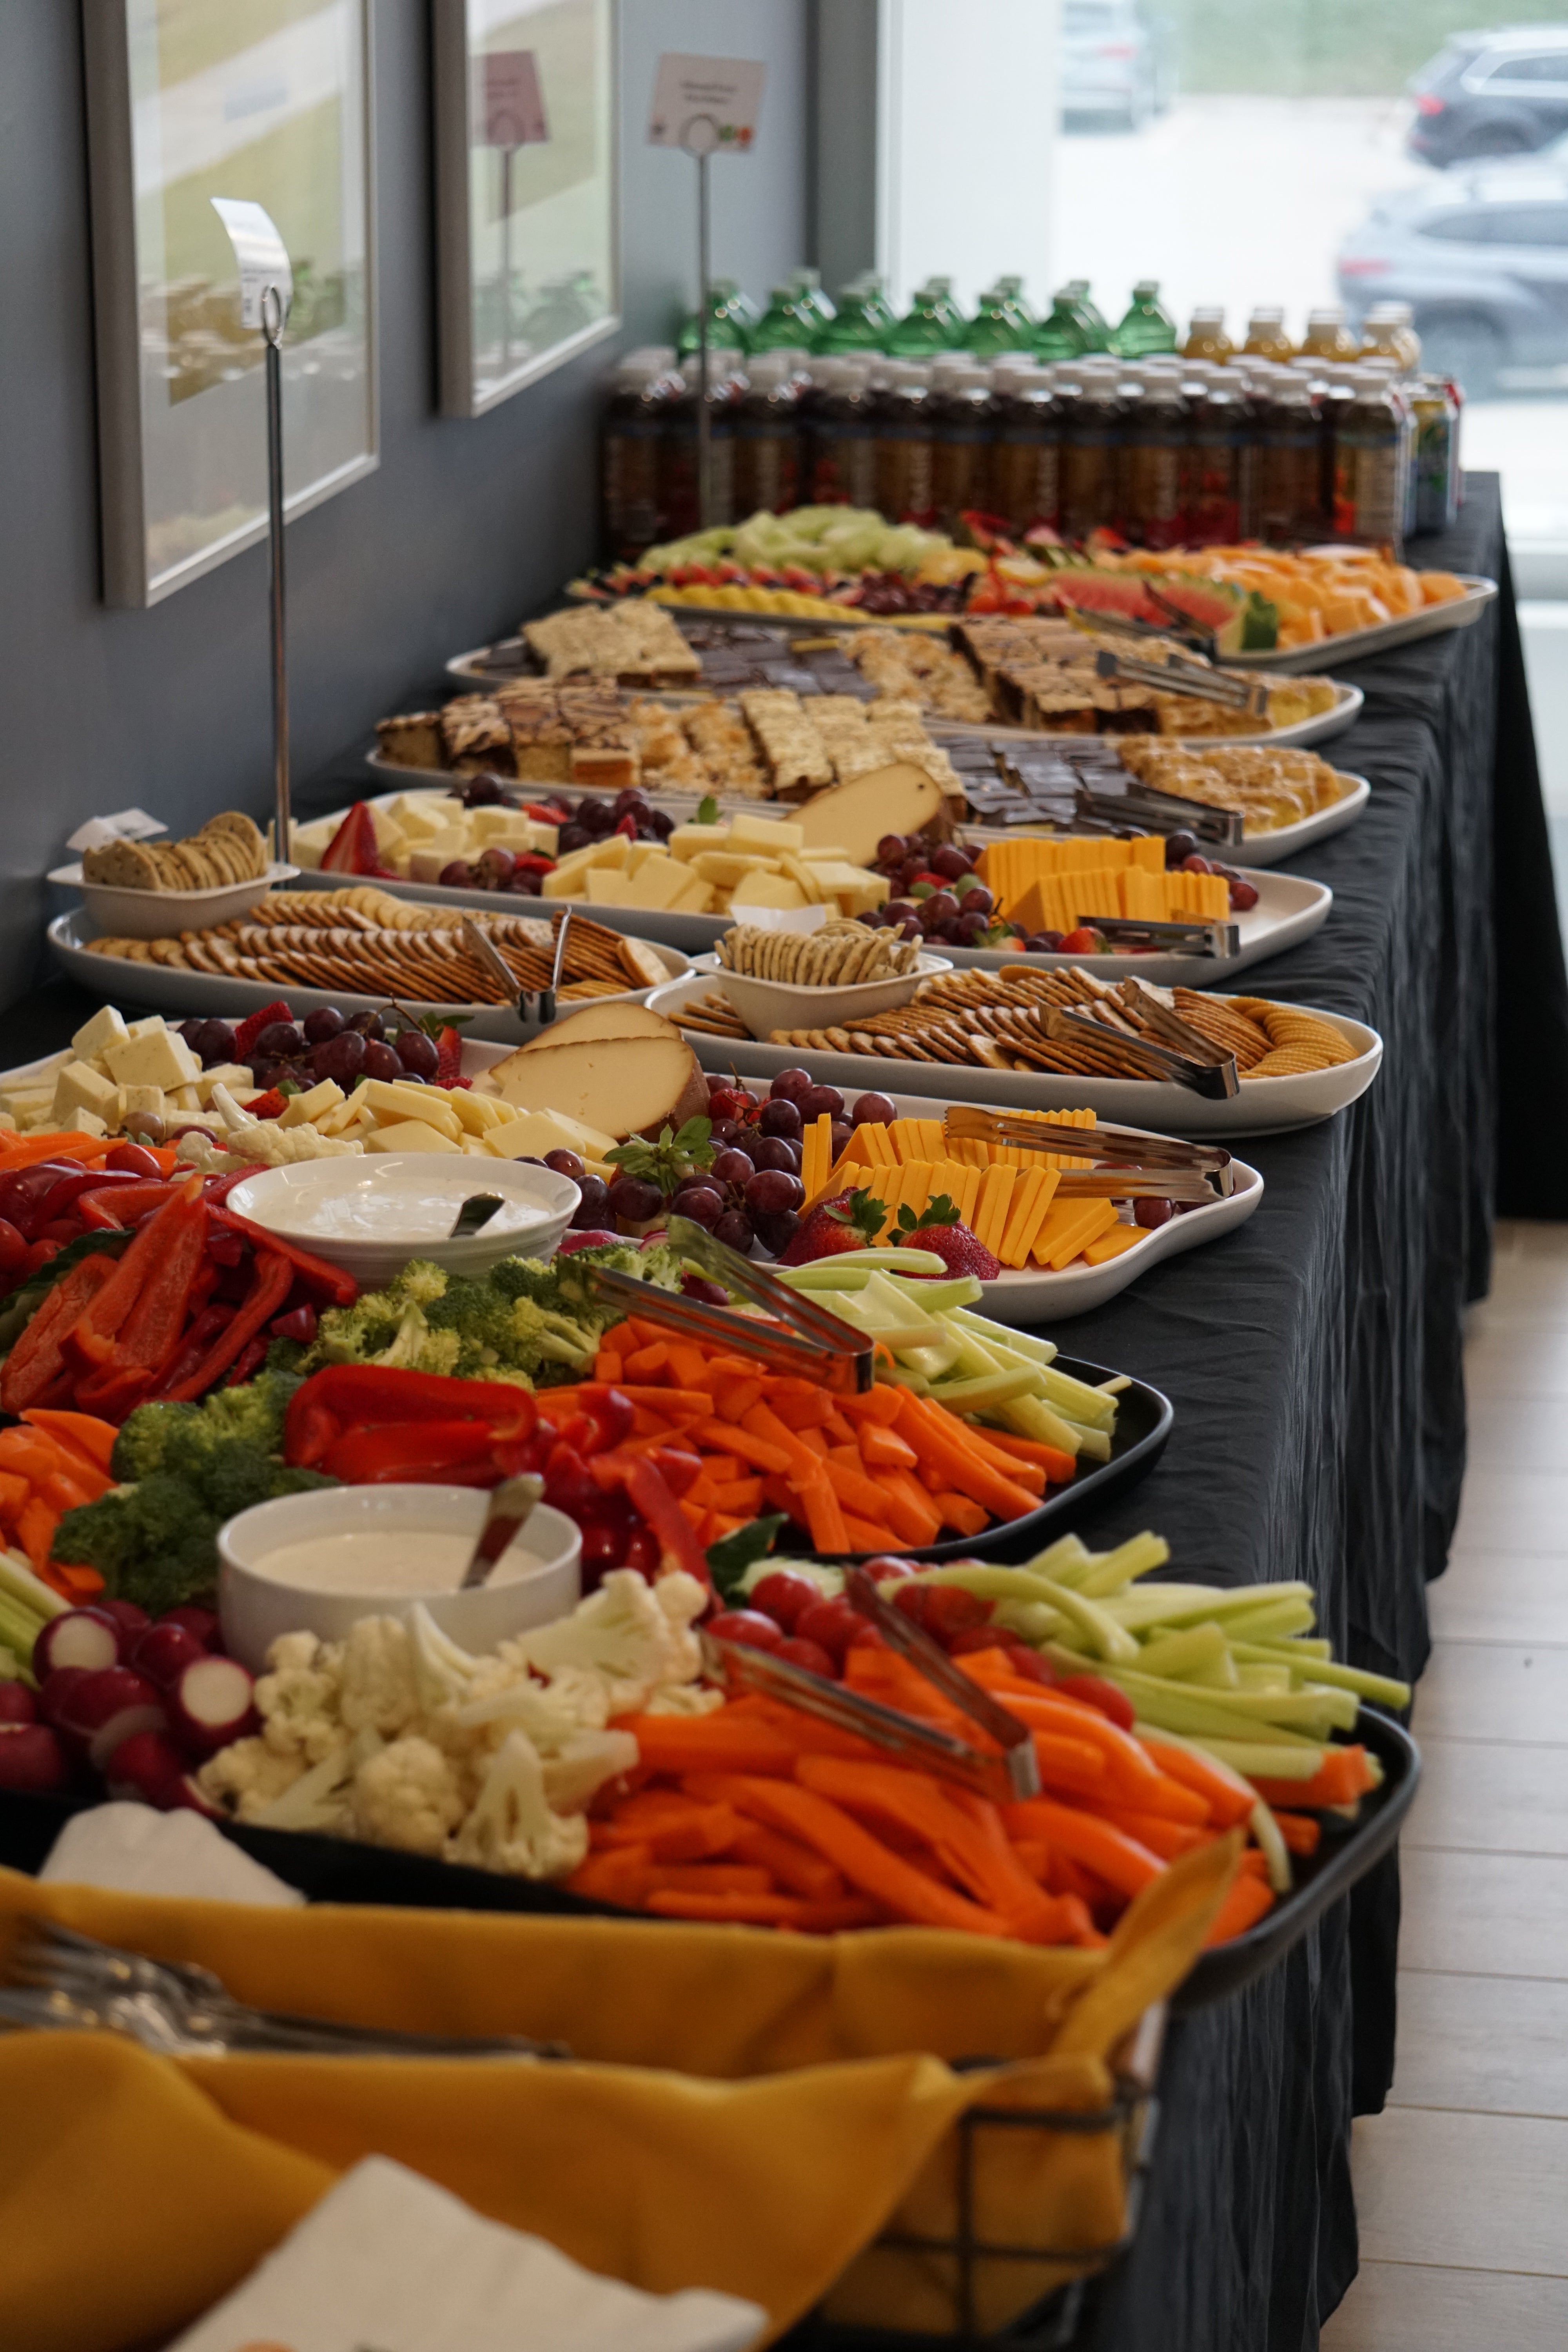 Spread of food including veggies, dips, cheeses, fruit and desserts.